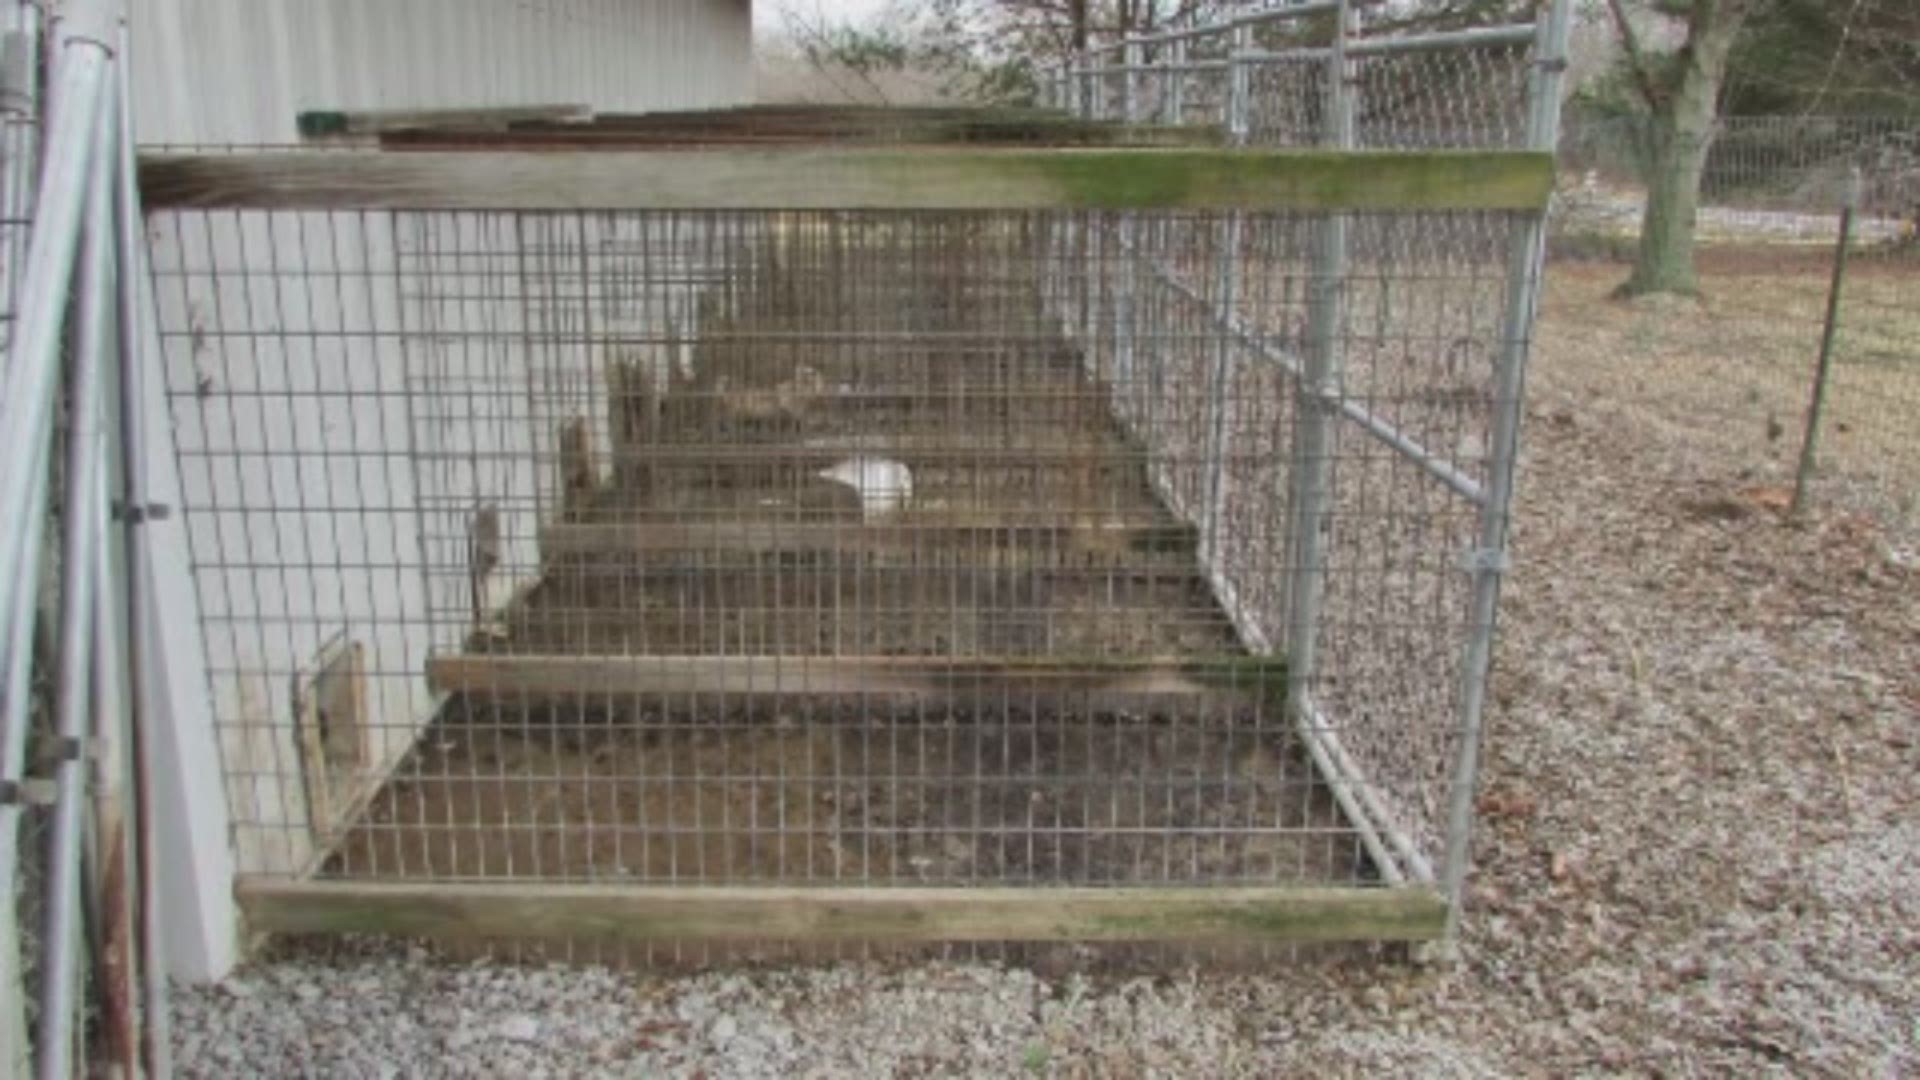 The community demands justice after a Taylor Co. animal abuse case was dismissed.